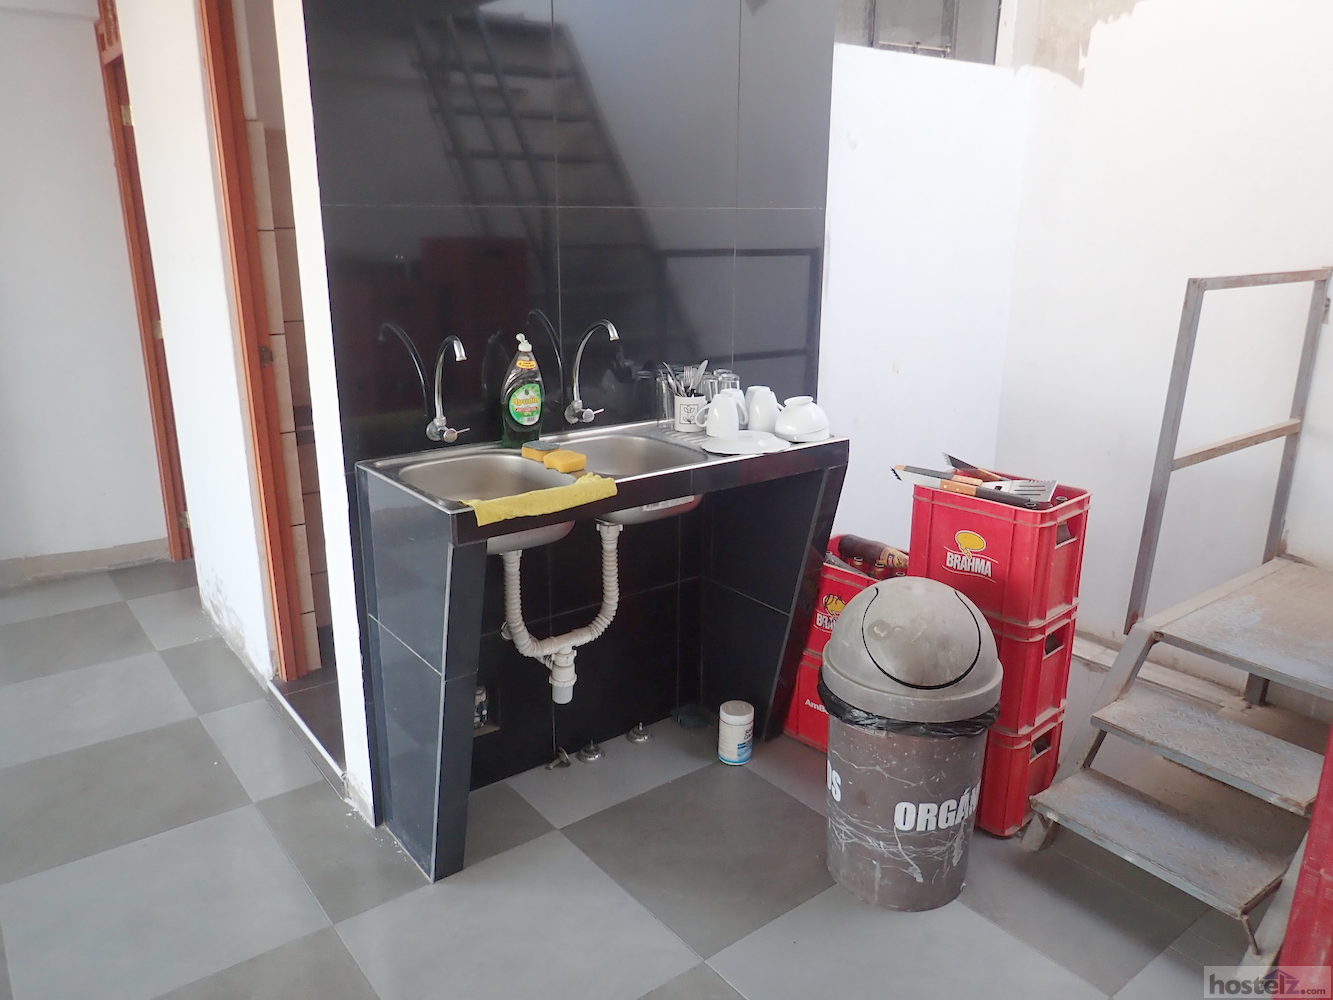 Communal ‘kitchen’ (just a sink and a microwave)